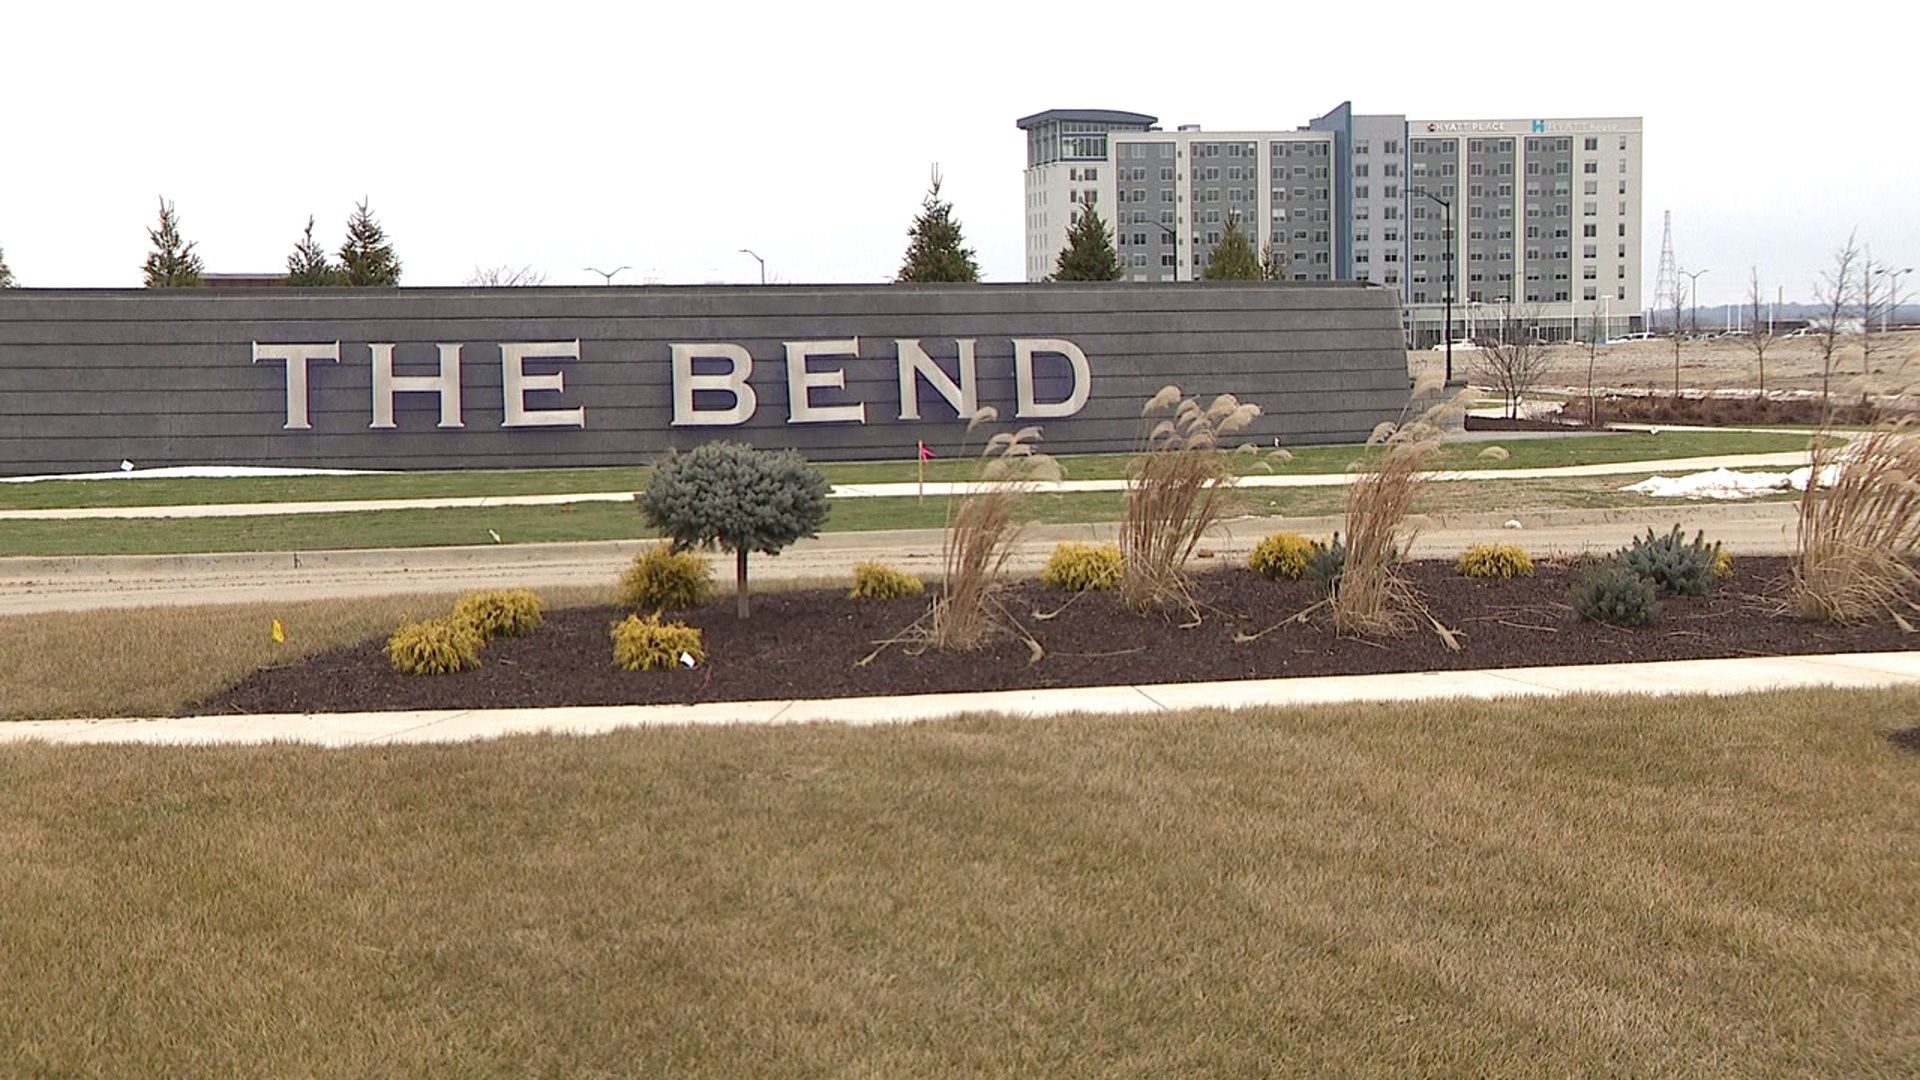 The Bend hotel opens